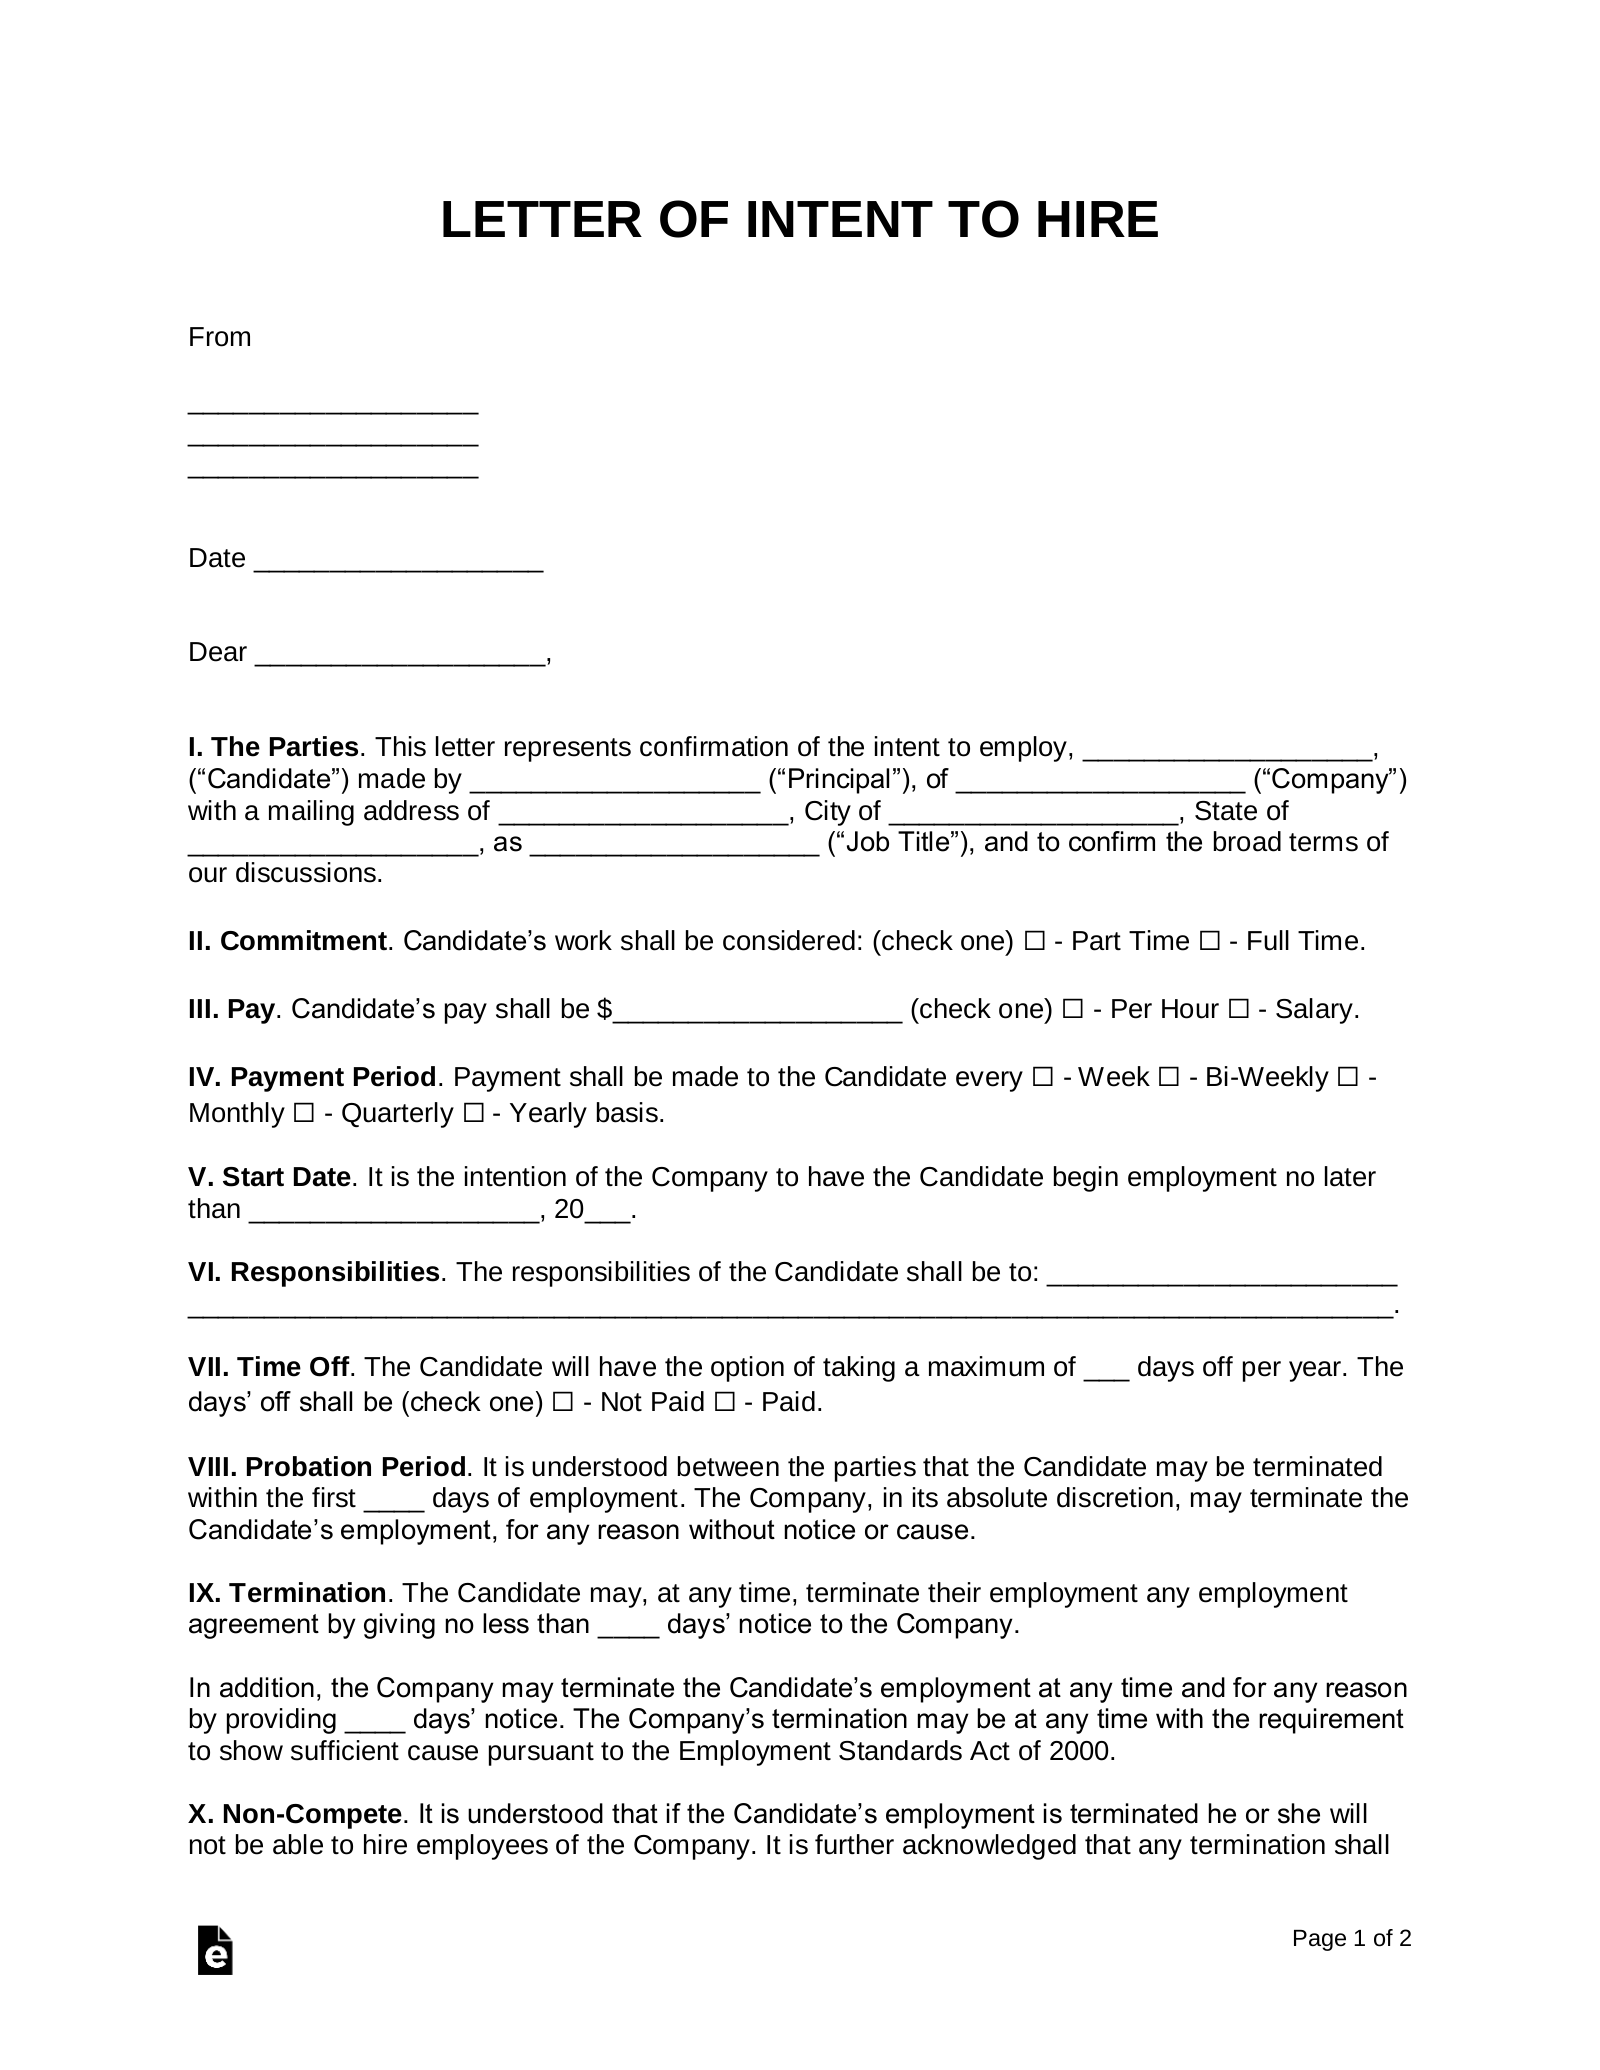 A Letter Of Intent from eforms.com